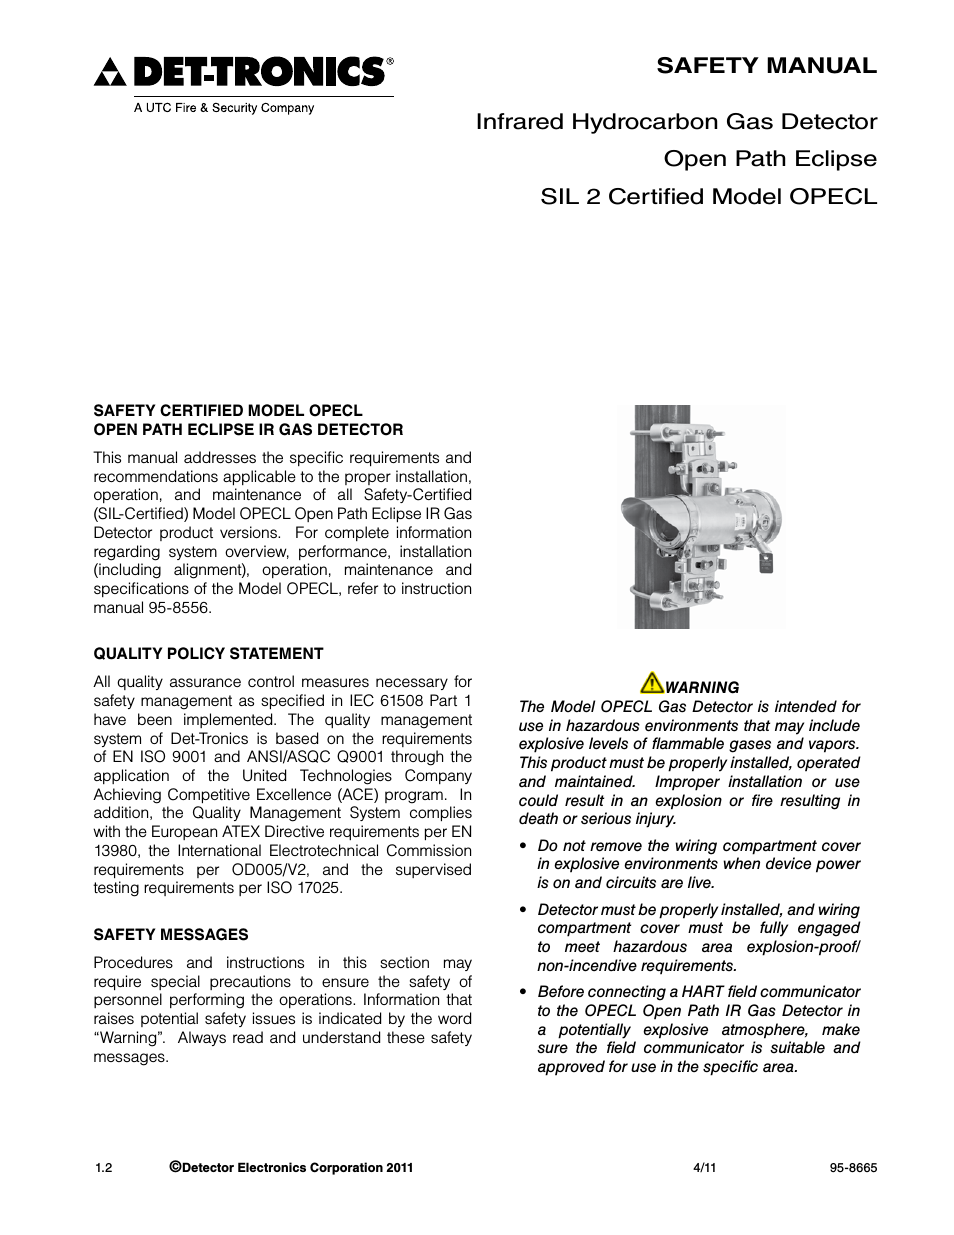 OPECL Infrared Hydrocarbon Gas Detector SAFETY MANUAL